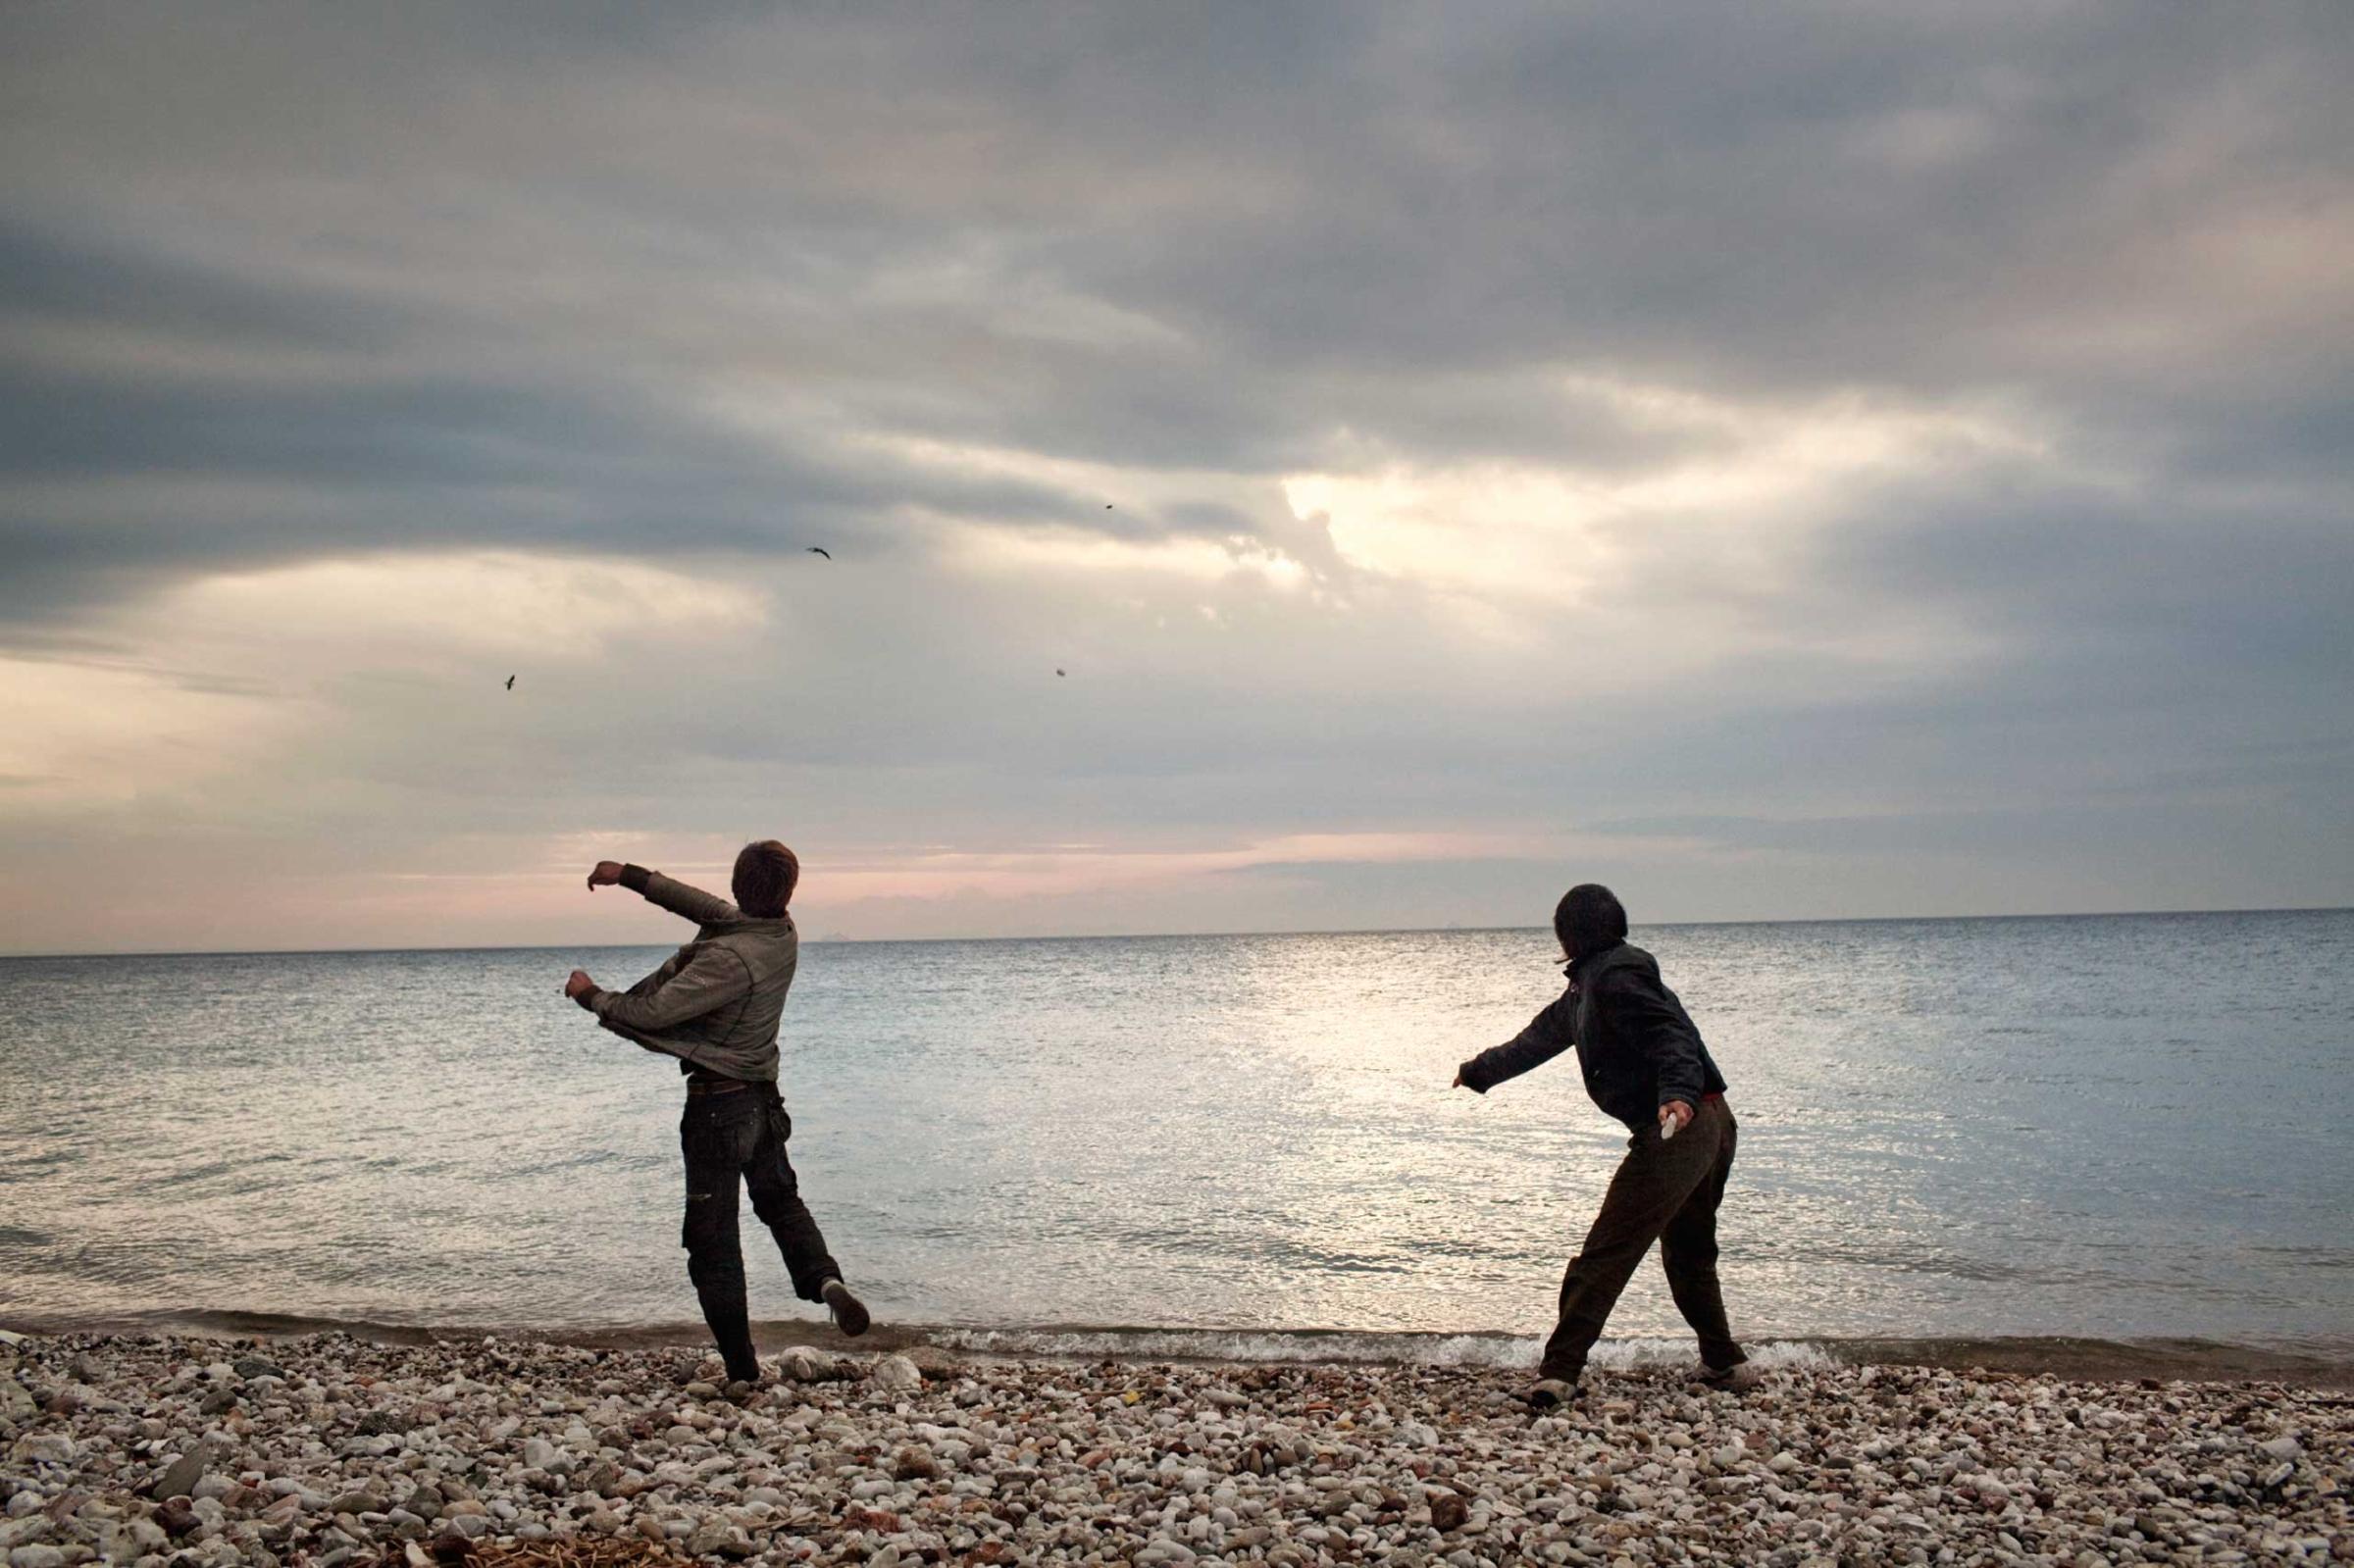 Afghan boys throw stones into the sea. At night, they will try to sneak into the port hoping to illegally board a ship bound for Italy, 2012.